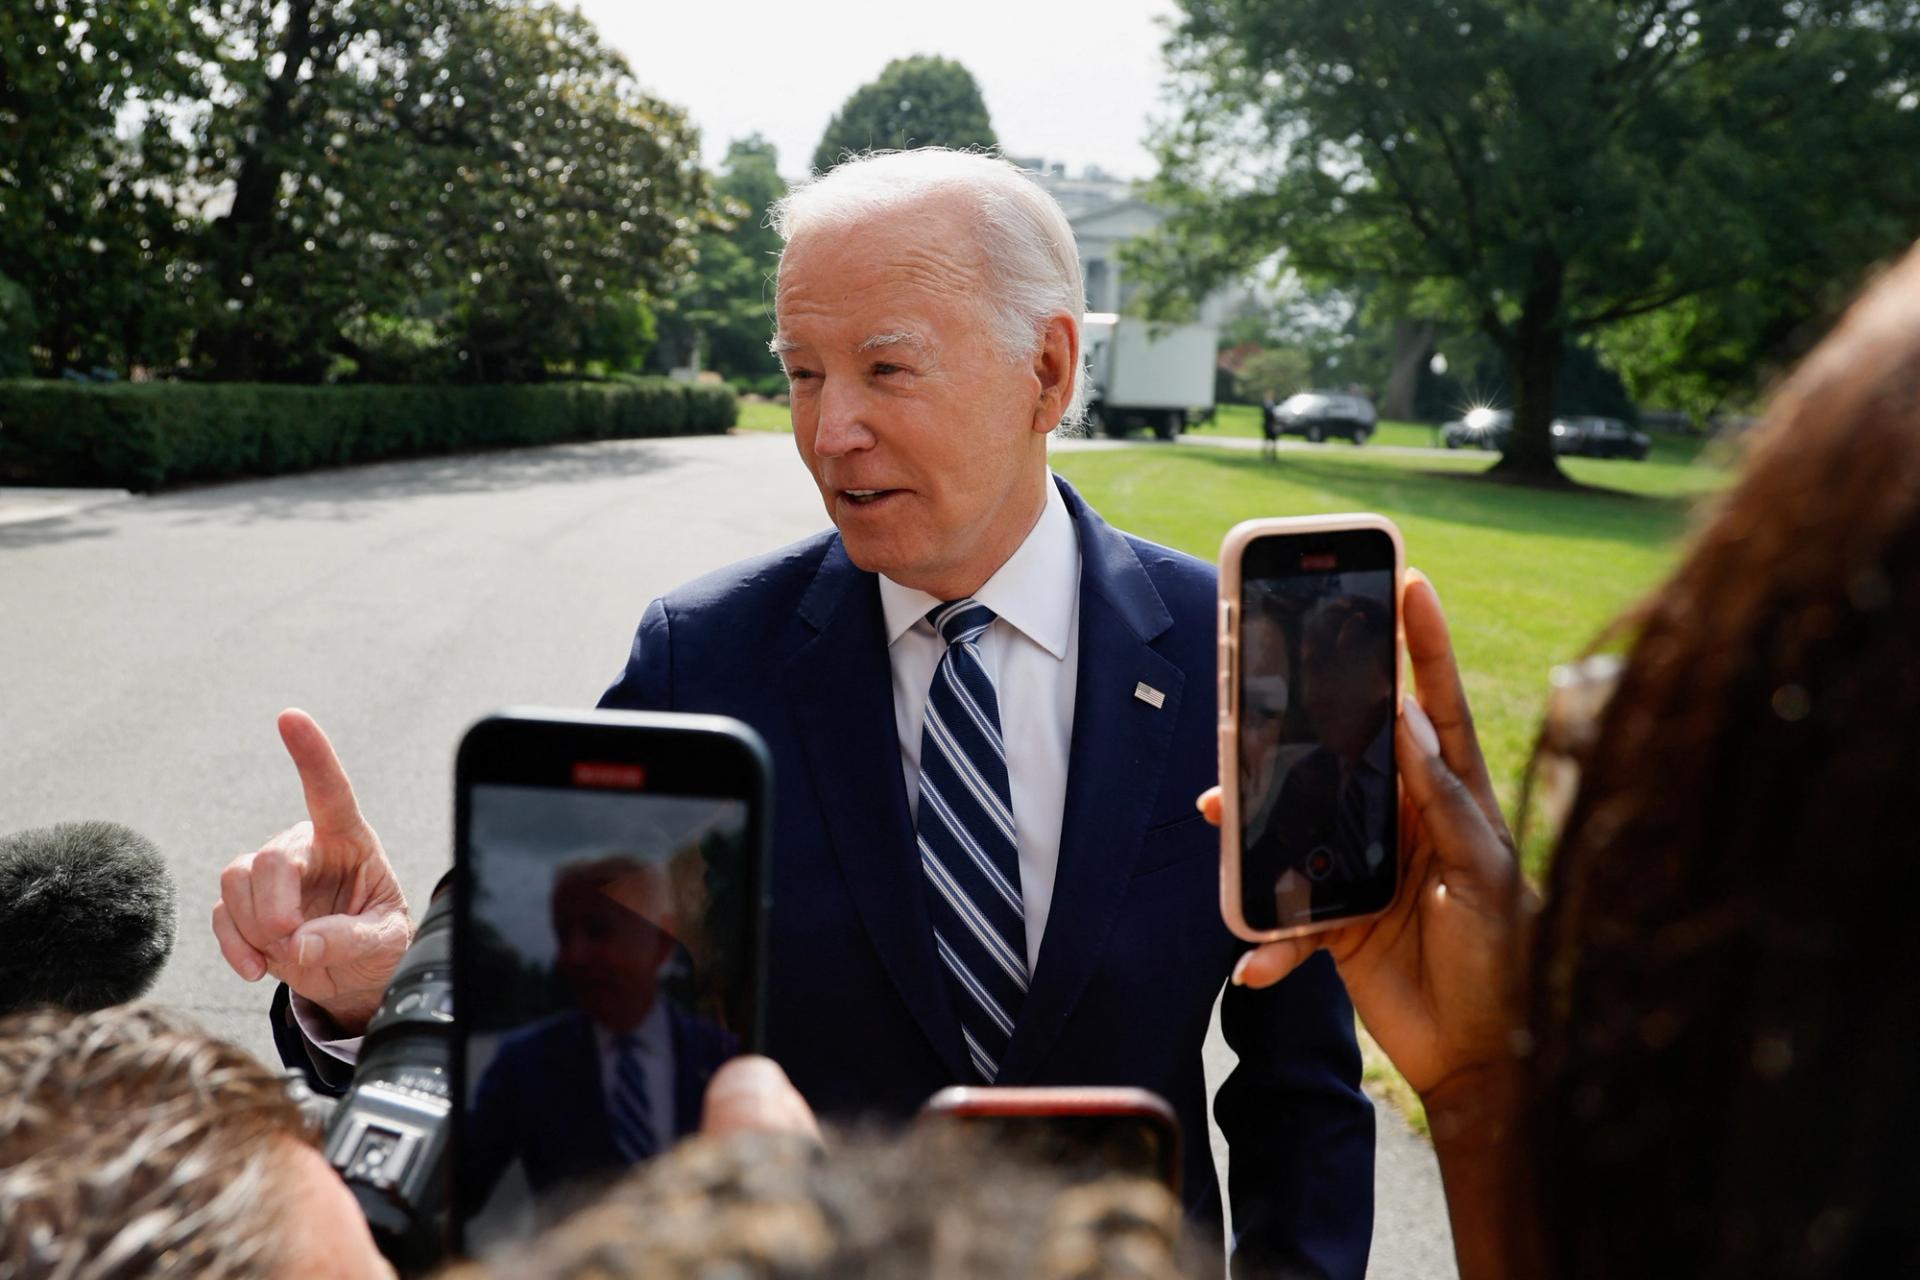 U.S. President Joe Biden speaks to members of the media as he departs for travel to Chicago from the White House in Washington, U.S. June 28, 2023.